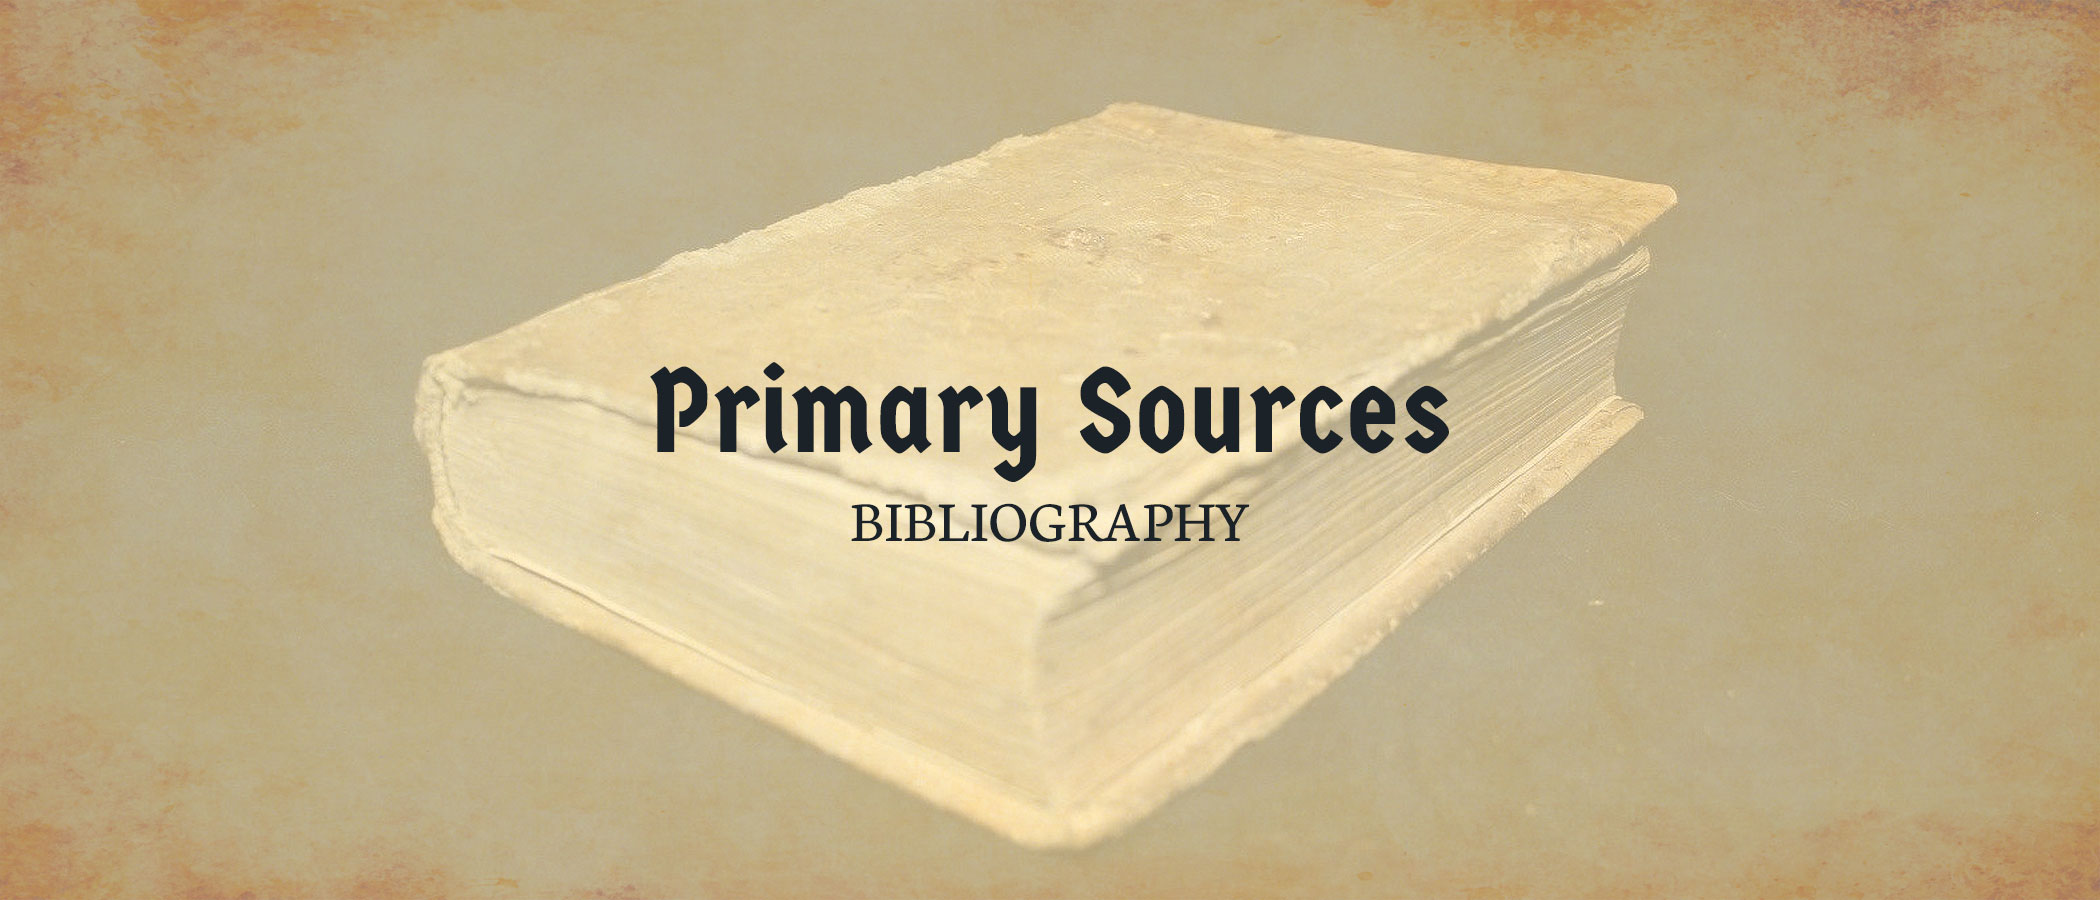 Bibliography 10: Academic and Primary Sources